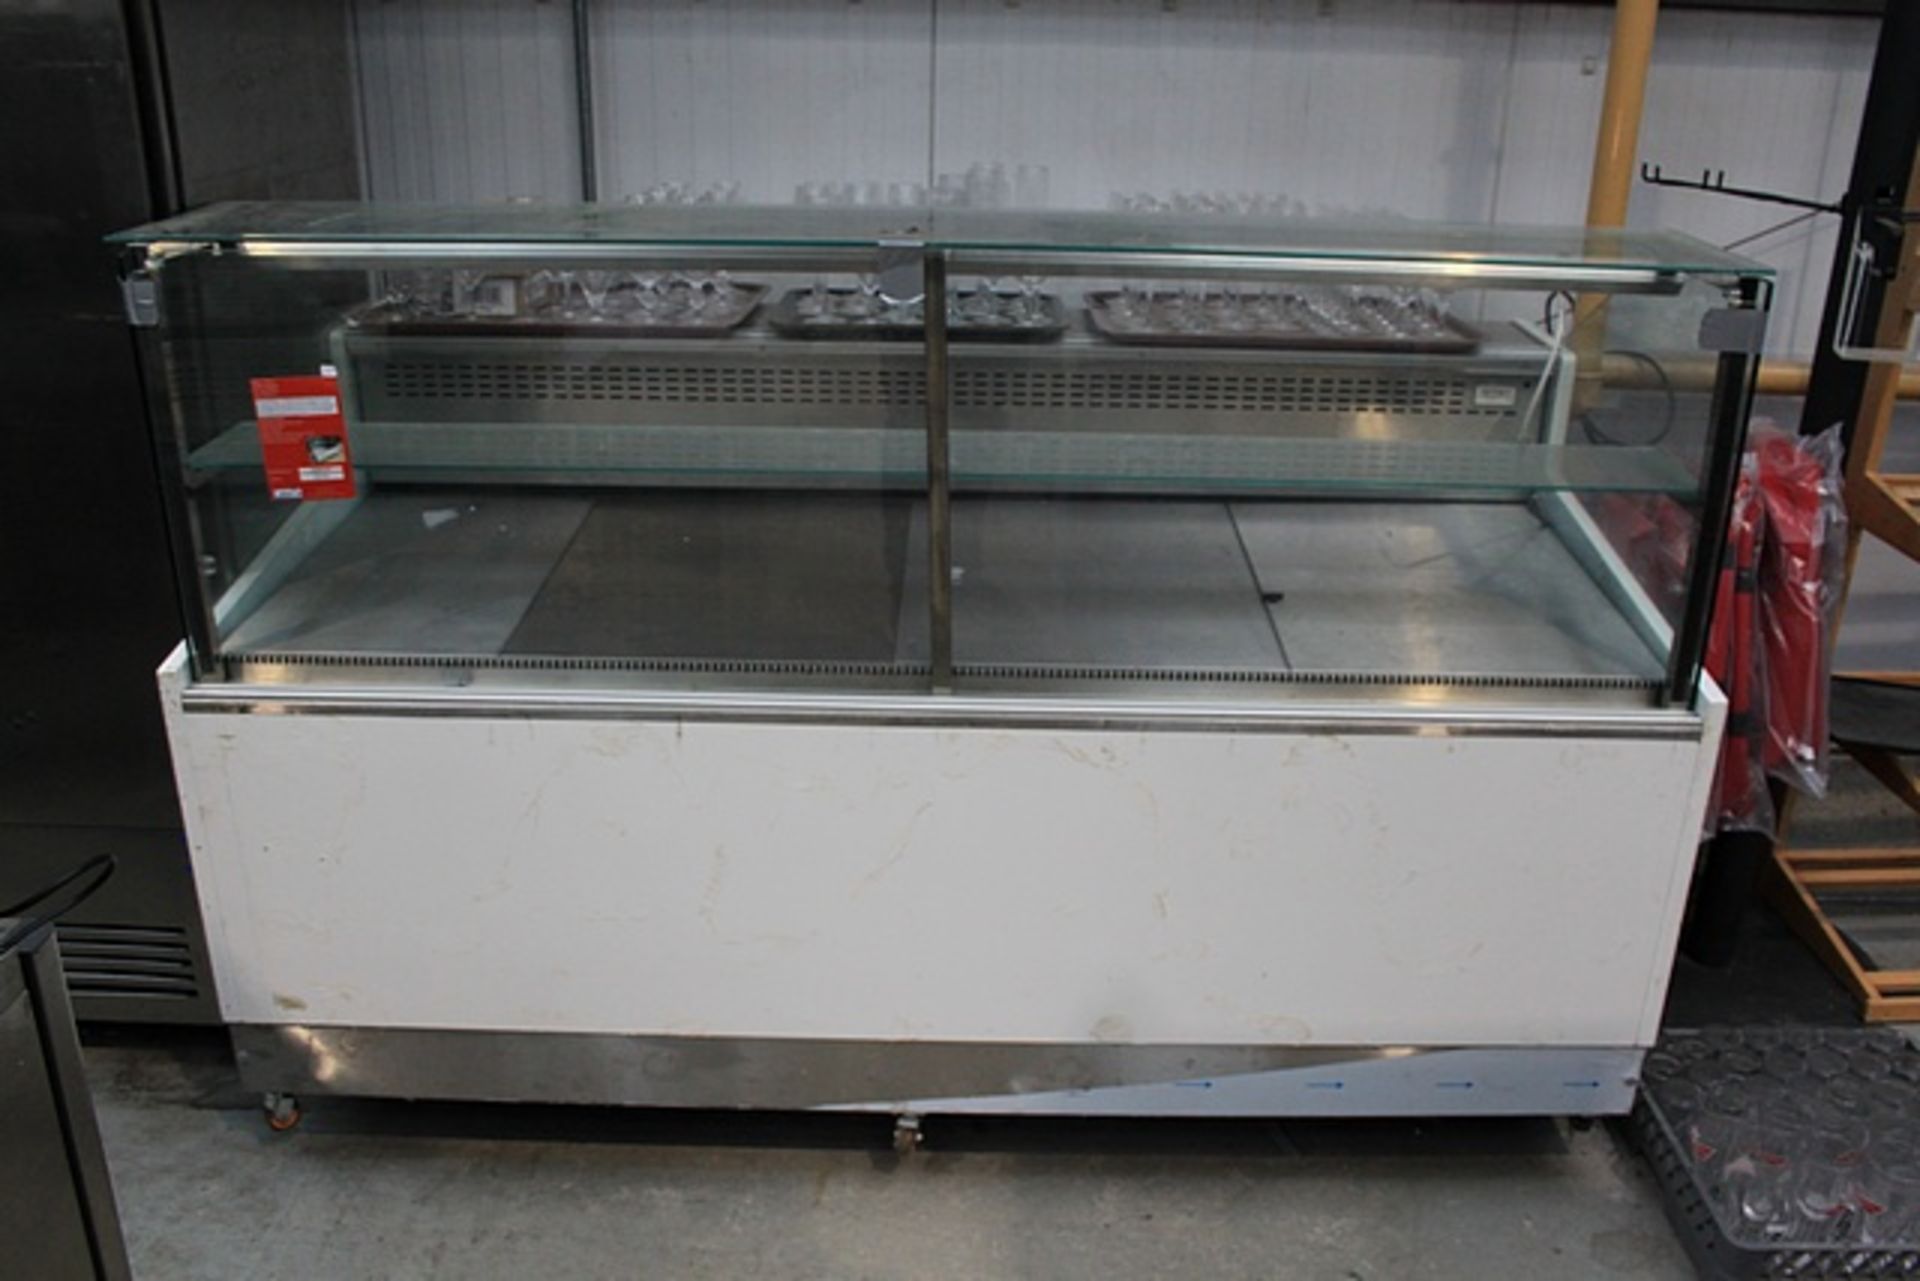 Trimco Brabant Glass Fronted Refrigerated Display Counter The Trimco Brabant is a contemporary range